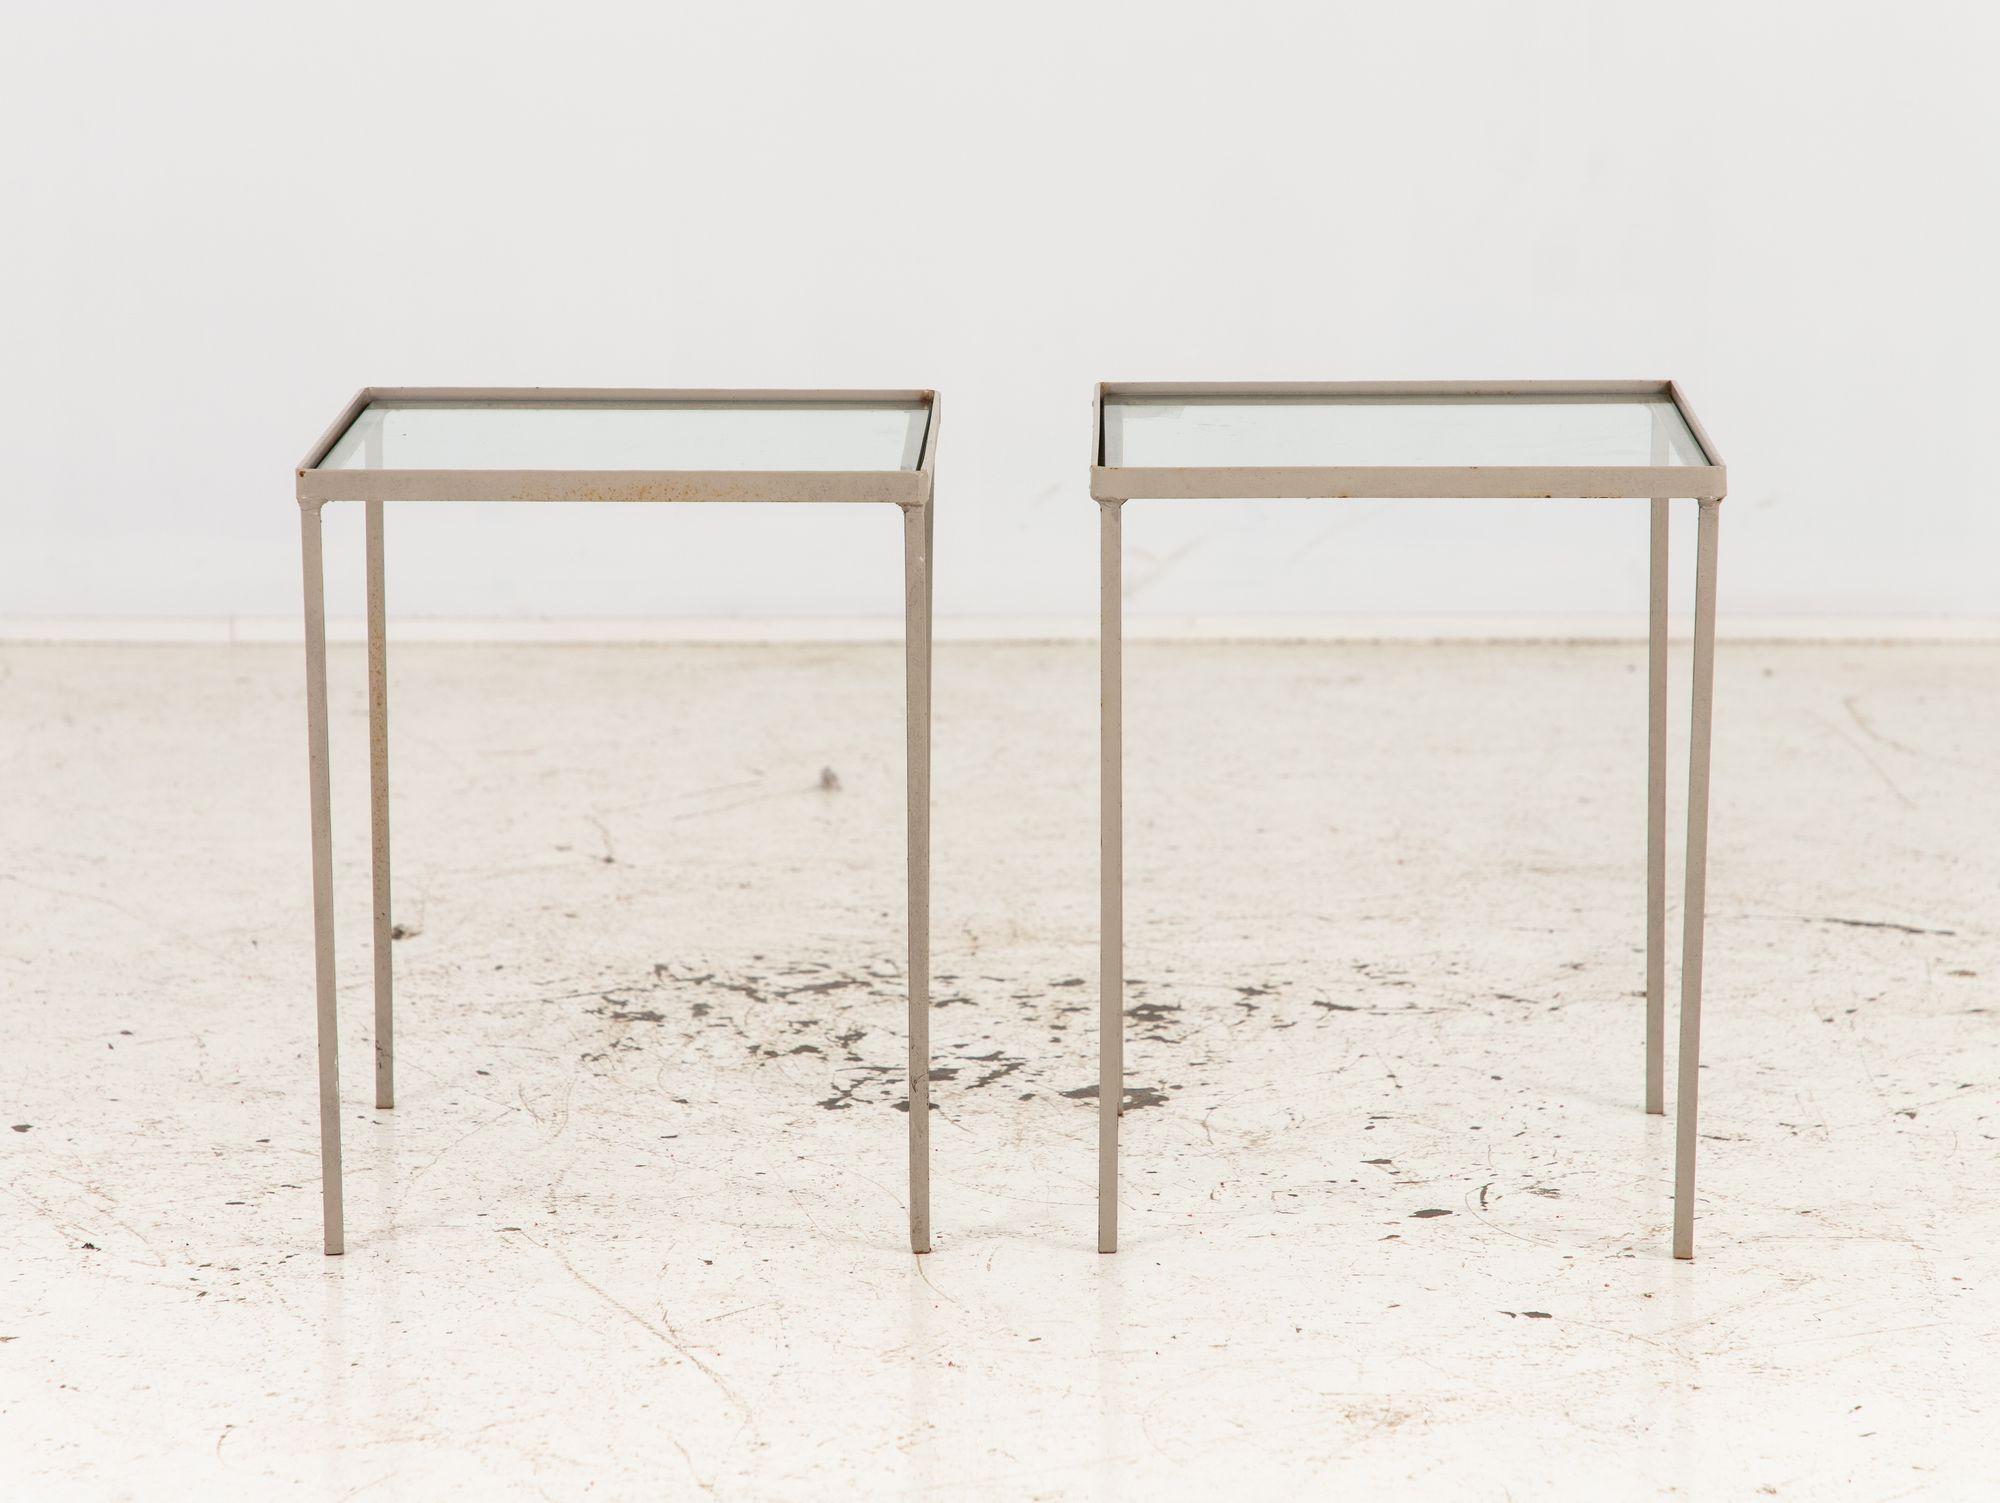 A pair of minimalist square garden side tables, elegantly designed with a modern touch, featuring a sophisticated gray painted finish that effortlessly complements any outdoor setting. Crafted from lightweight yet durable aluminum frames, they